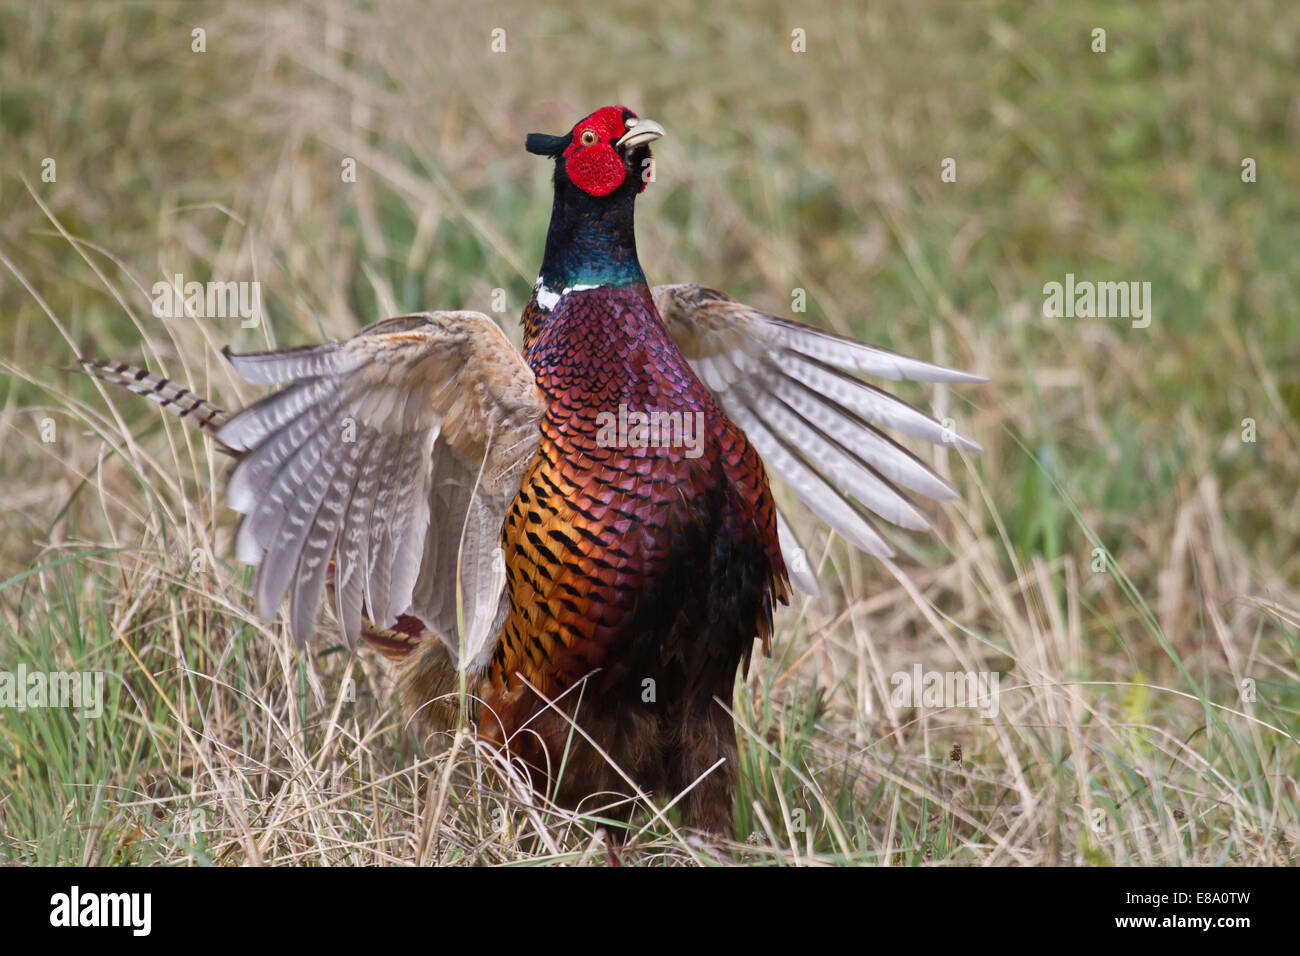 Pheasant (Phasianus colchicus), flutter jump, Texel, The Netherlands Stock Photo